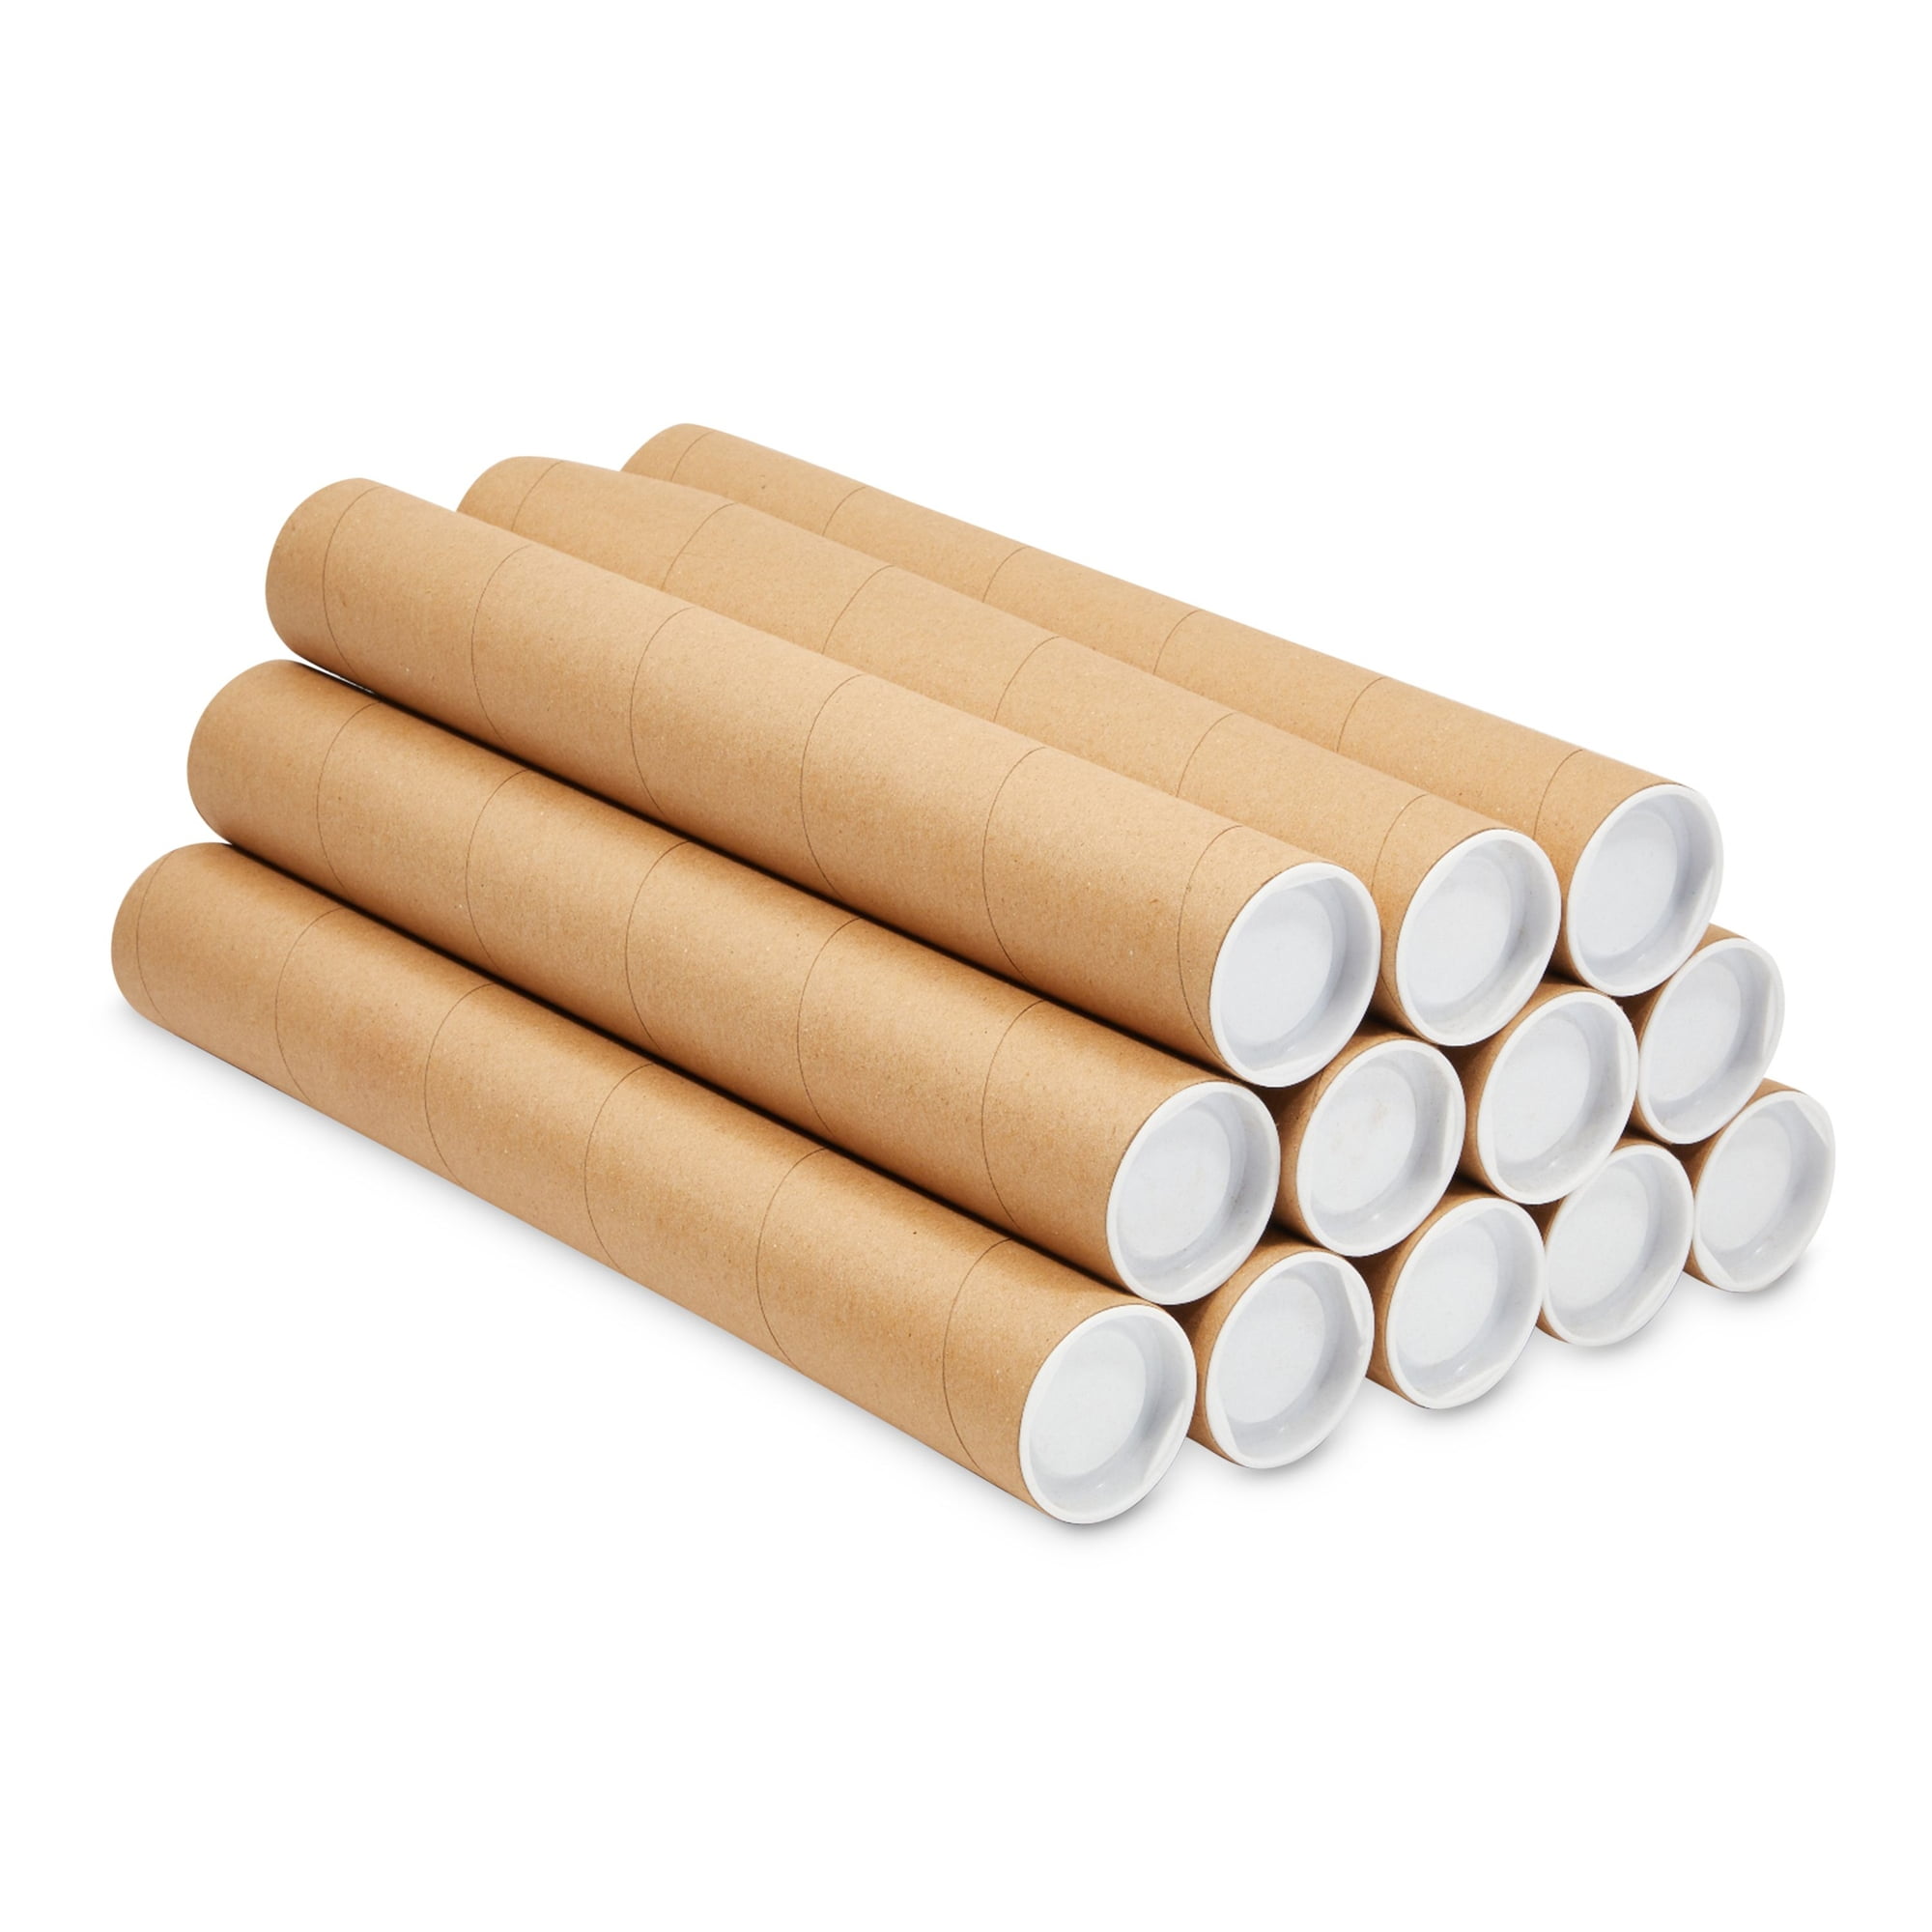 2 X 22 Inch Kraft Shipping Tubes with Caps for Posters, Art Prints